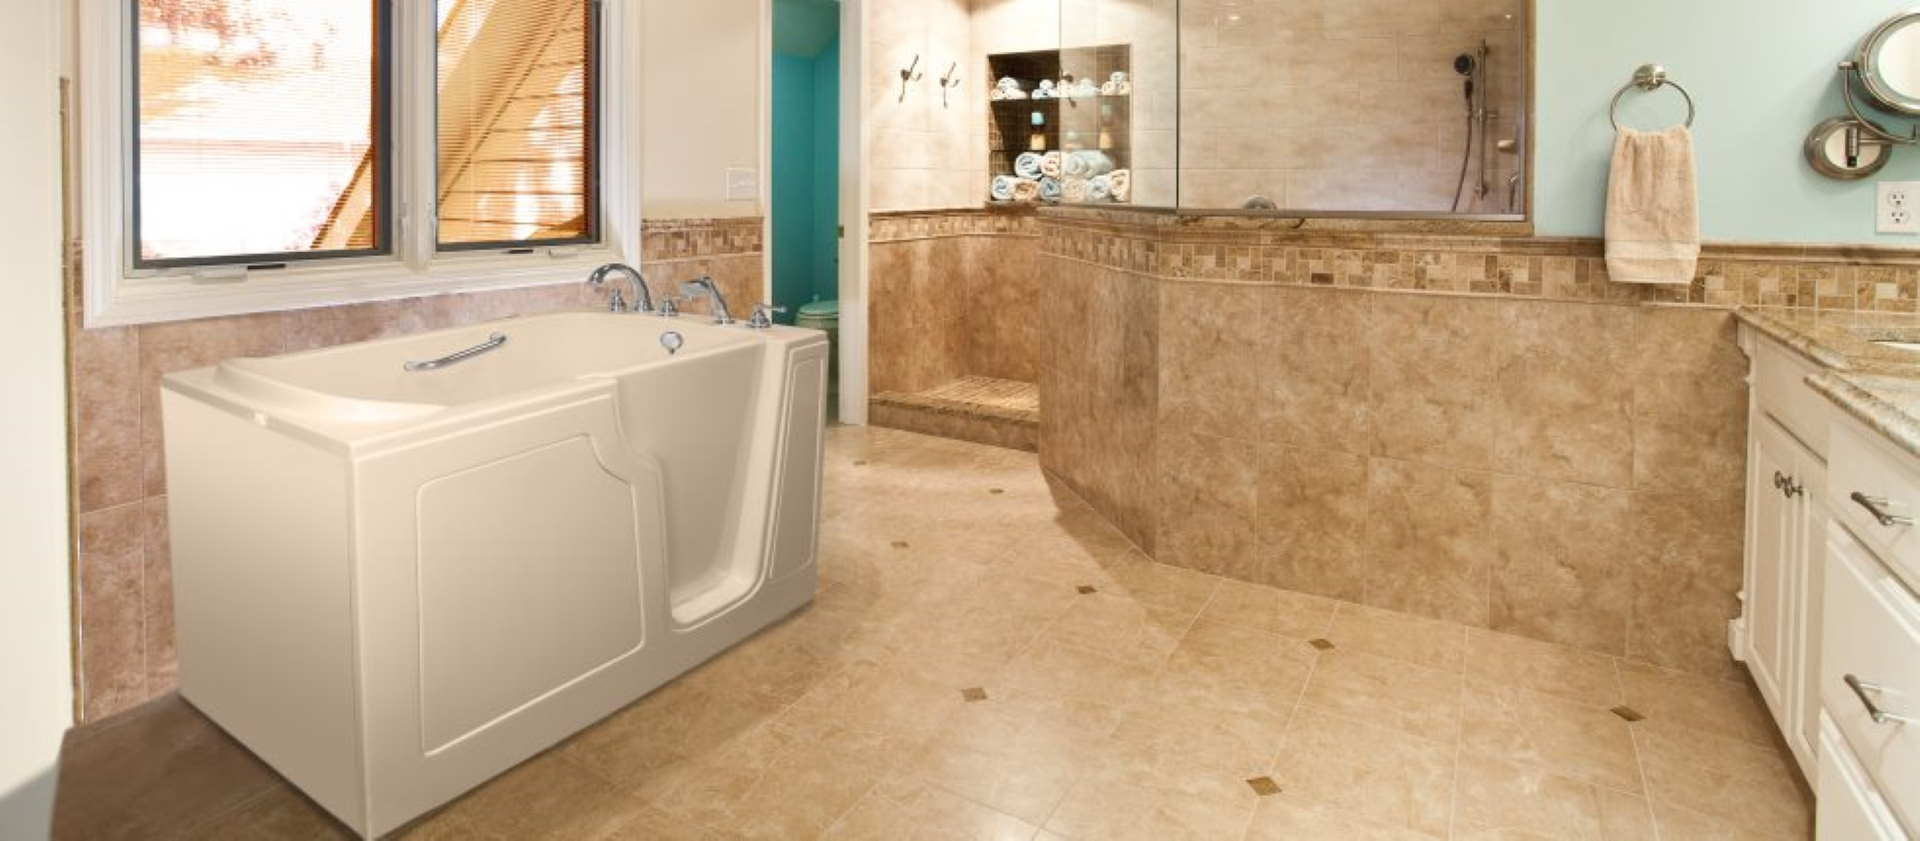 Benefits of Walk in Tubs by Independent Home Products, LLC